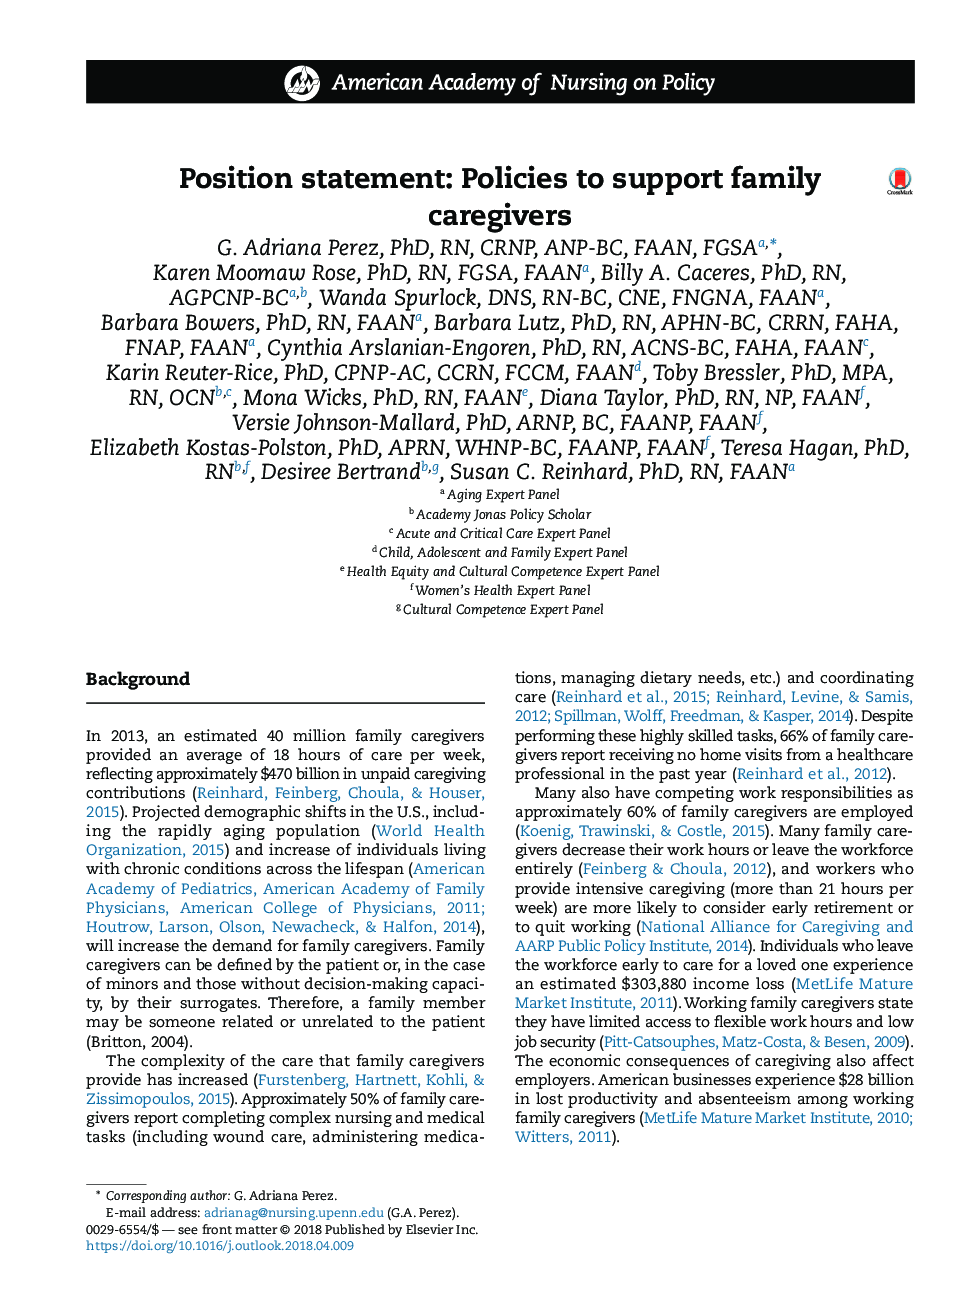 Position statement: Policies to support family caregivers